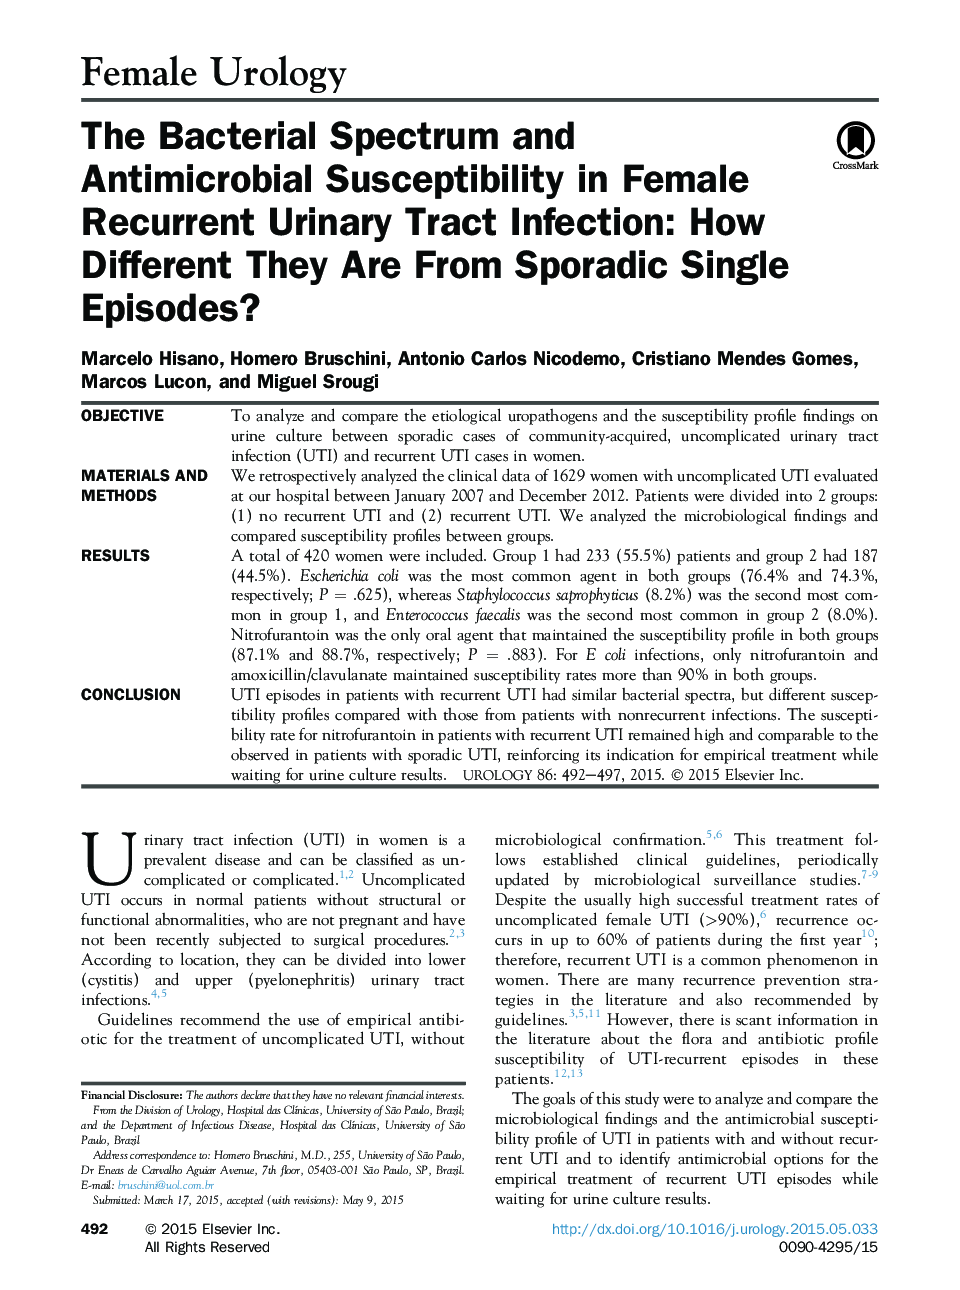 Female UrologyThe Bacterial Spectrum and Antimicrobial Susceptibility in Female Recurrent Urinary Tract Infection: How Different They Are From Sporadic Single Episodes?